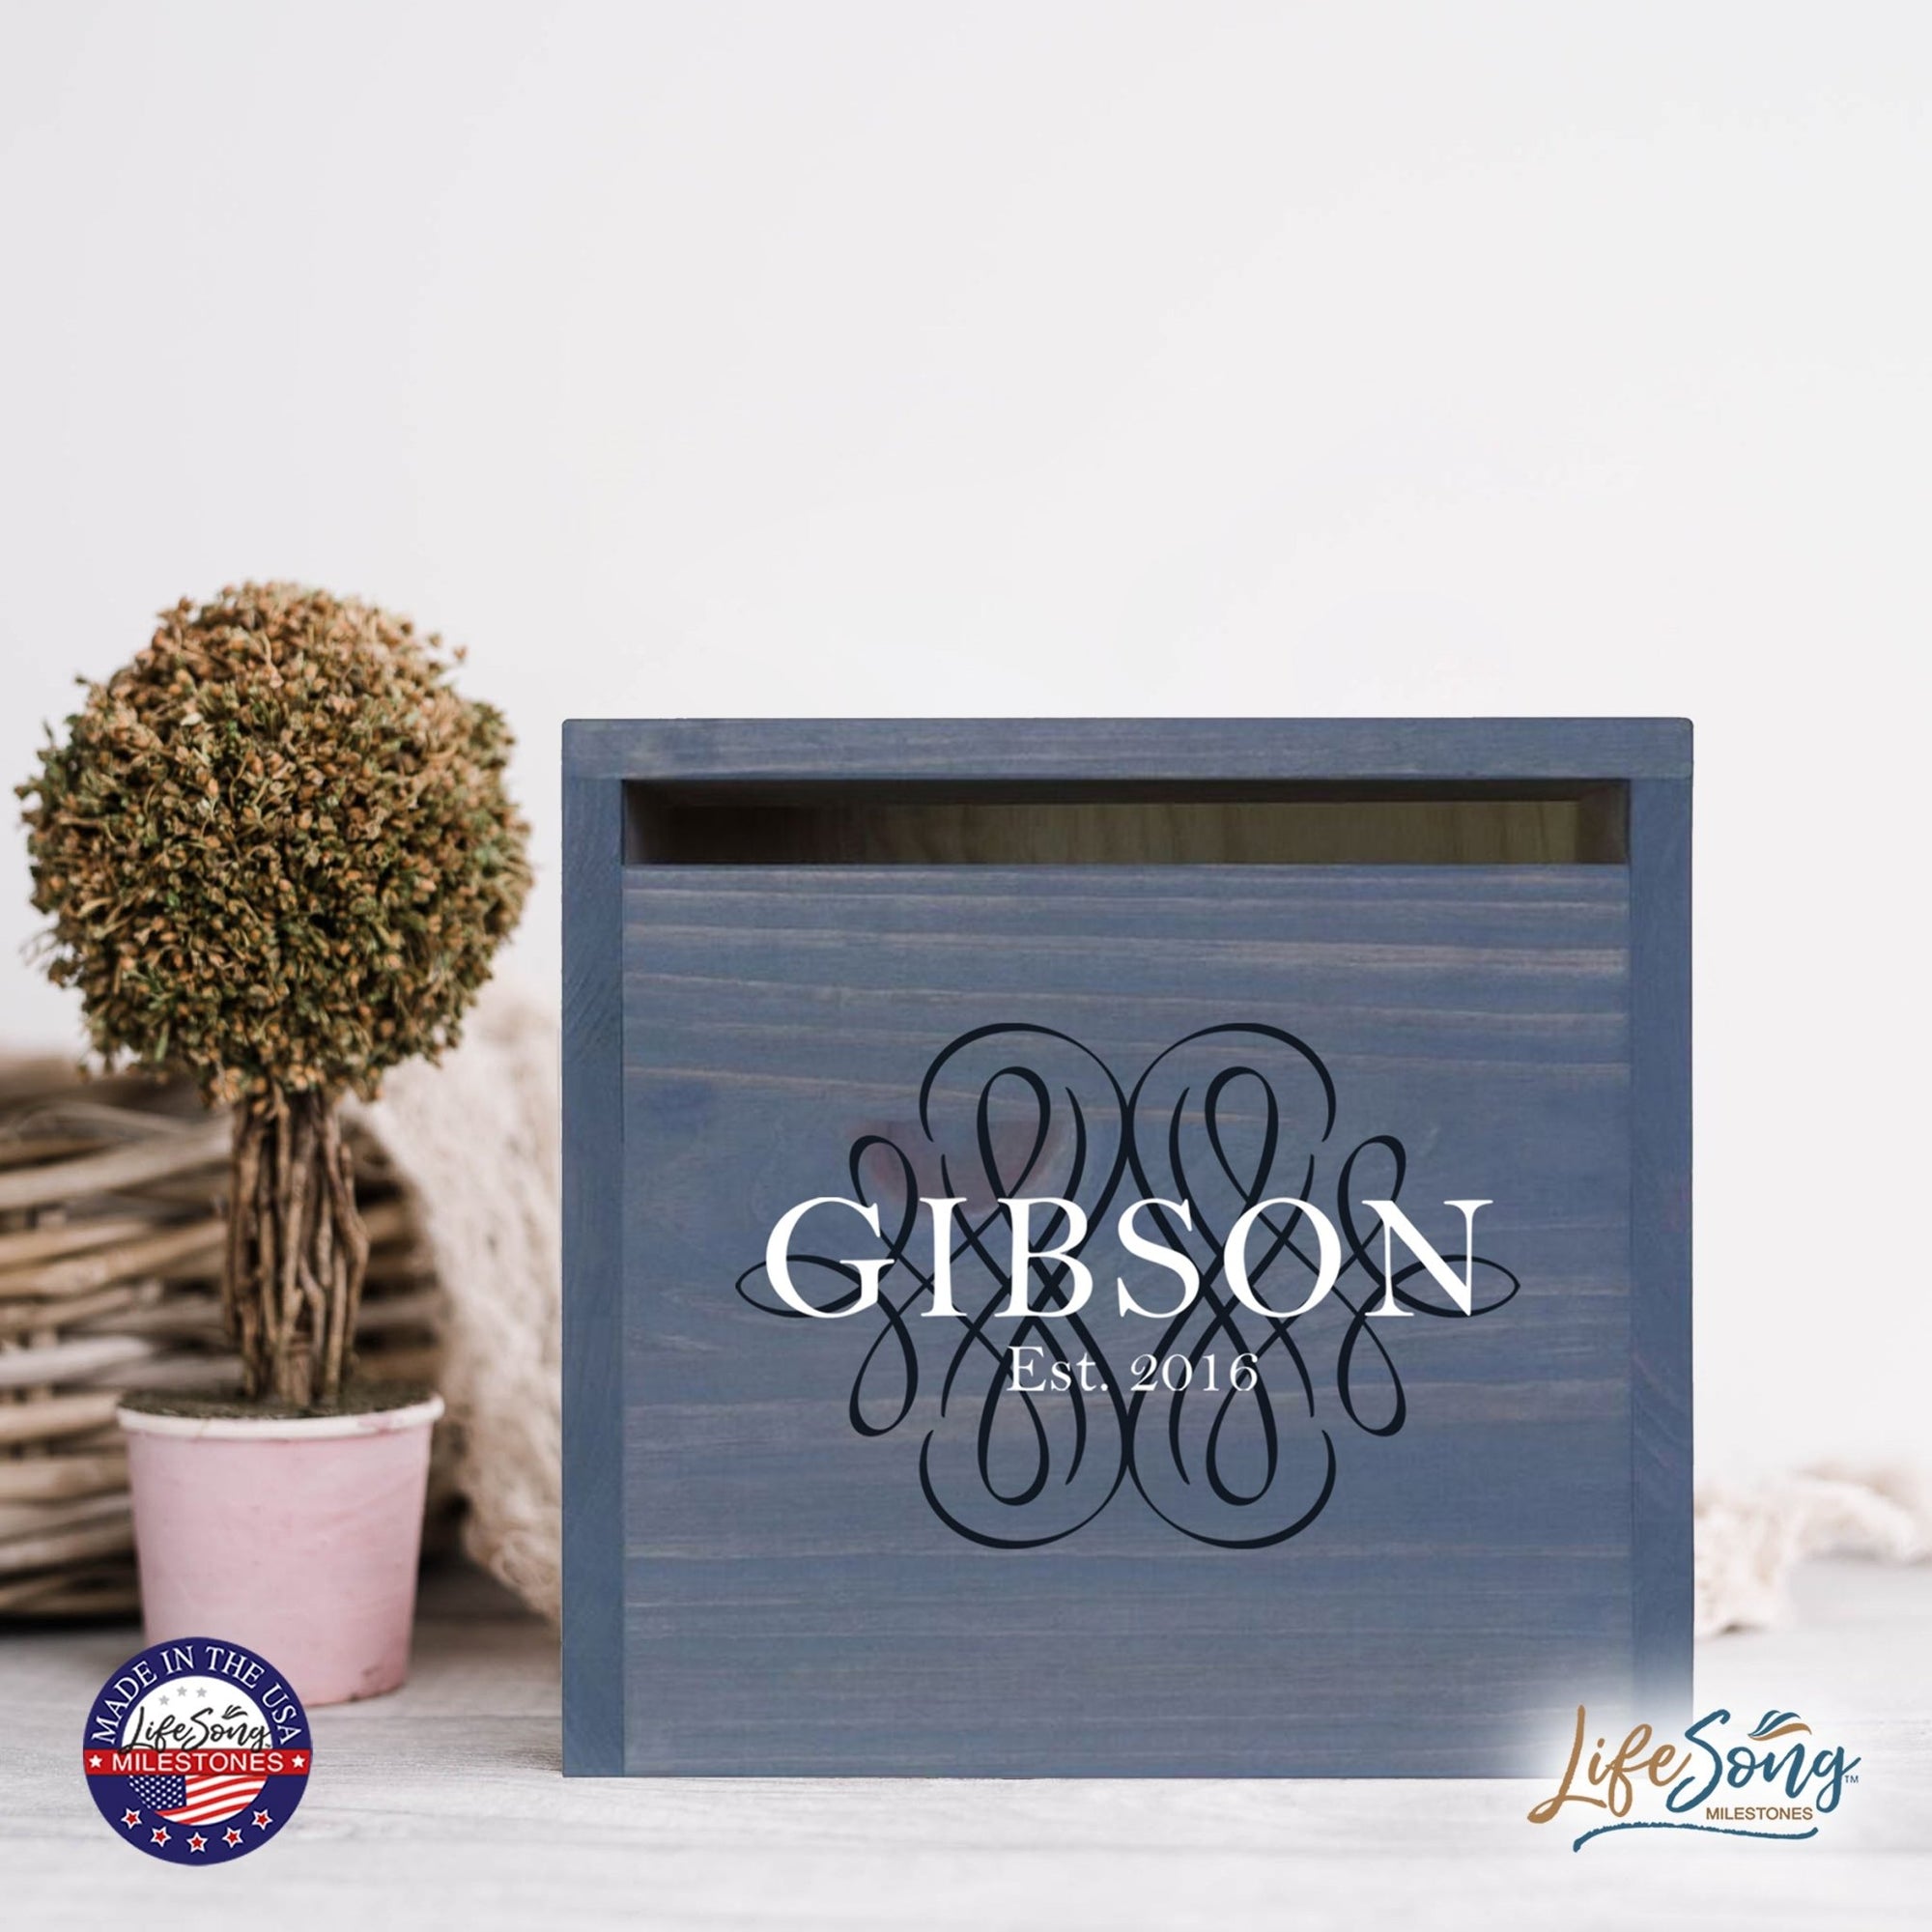 Personalized Wooden Card Box for Wedding Ceremonies, Venues, Receptions, Bridal Showers, and Engagement Parties 13.5x12 - Gibson - LifeSong Milestones